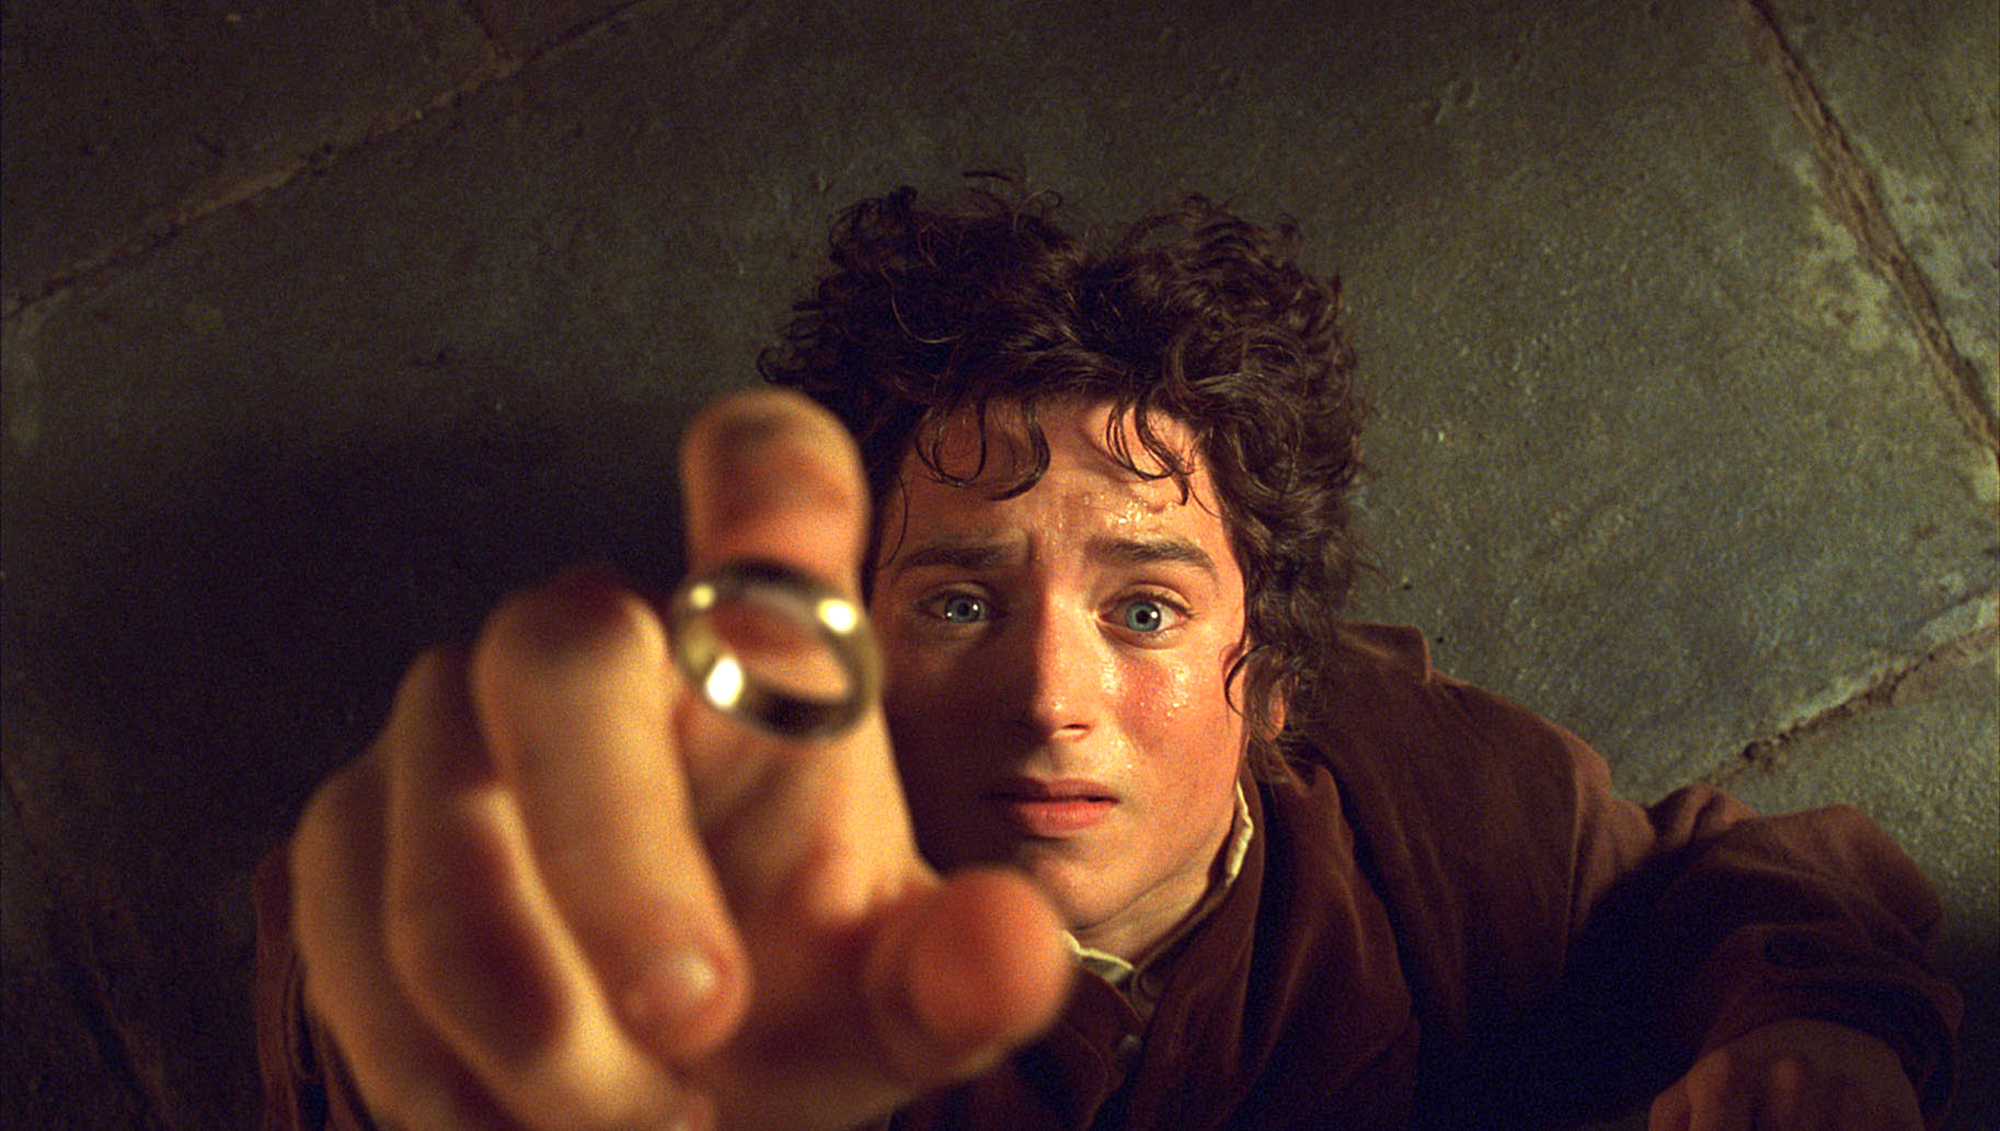 How to watch all The Lord of the Rings movies in order